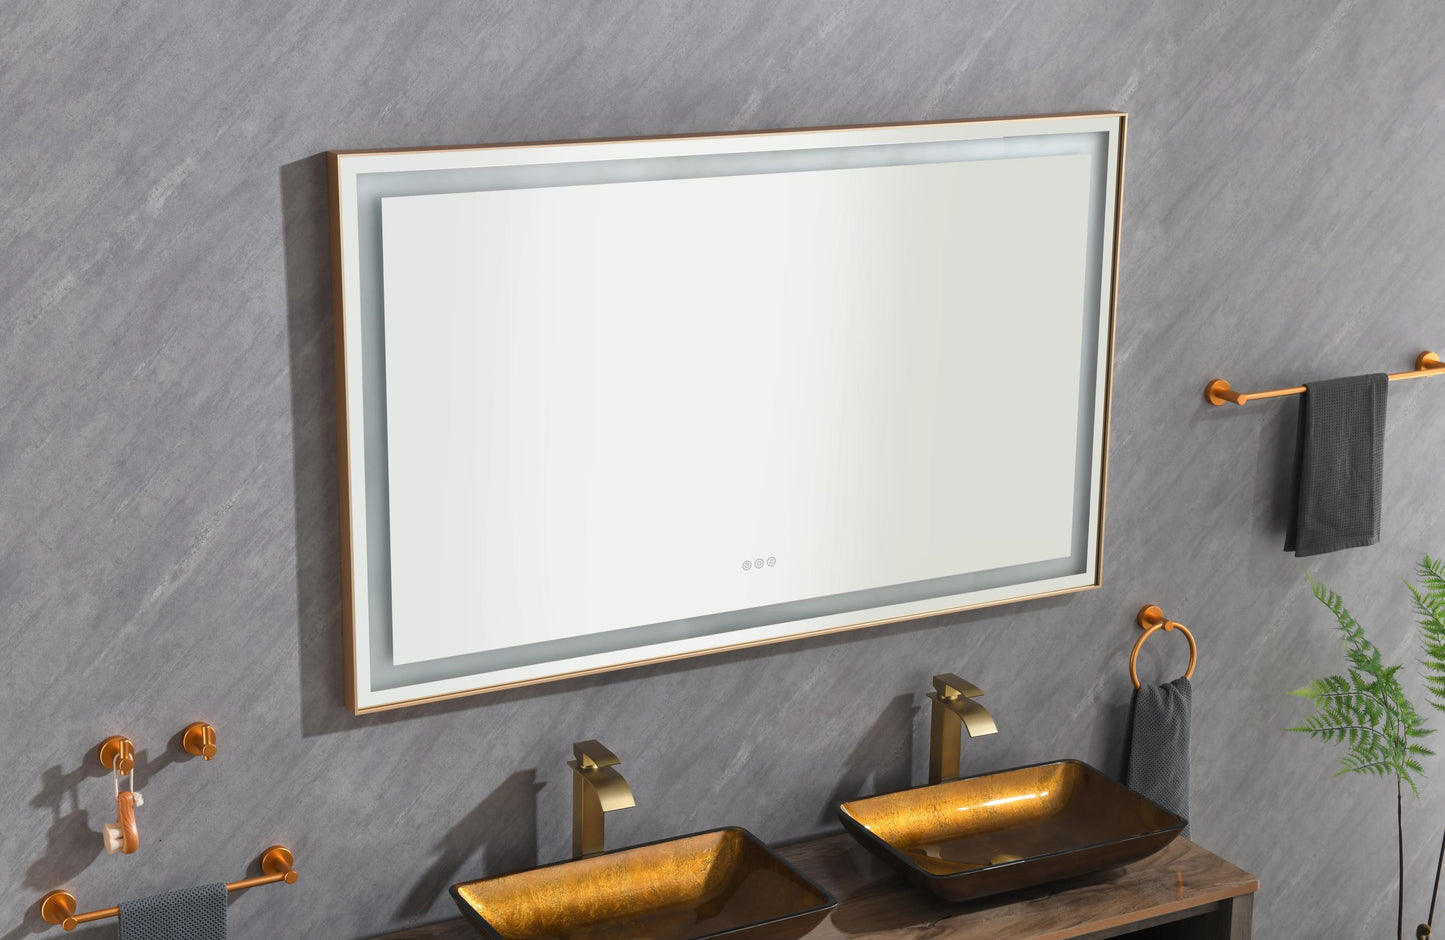 LTL needs to consult the warehouse address60*36 LED Lighted Bathroom Wall Mounted Mirror with High Lumen+Anti-Fog Separately Control